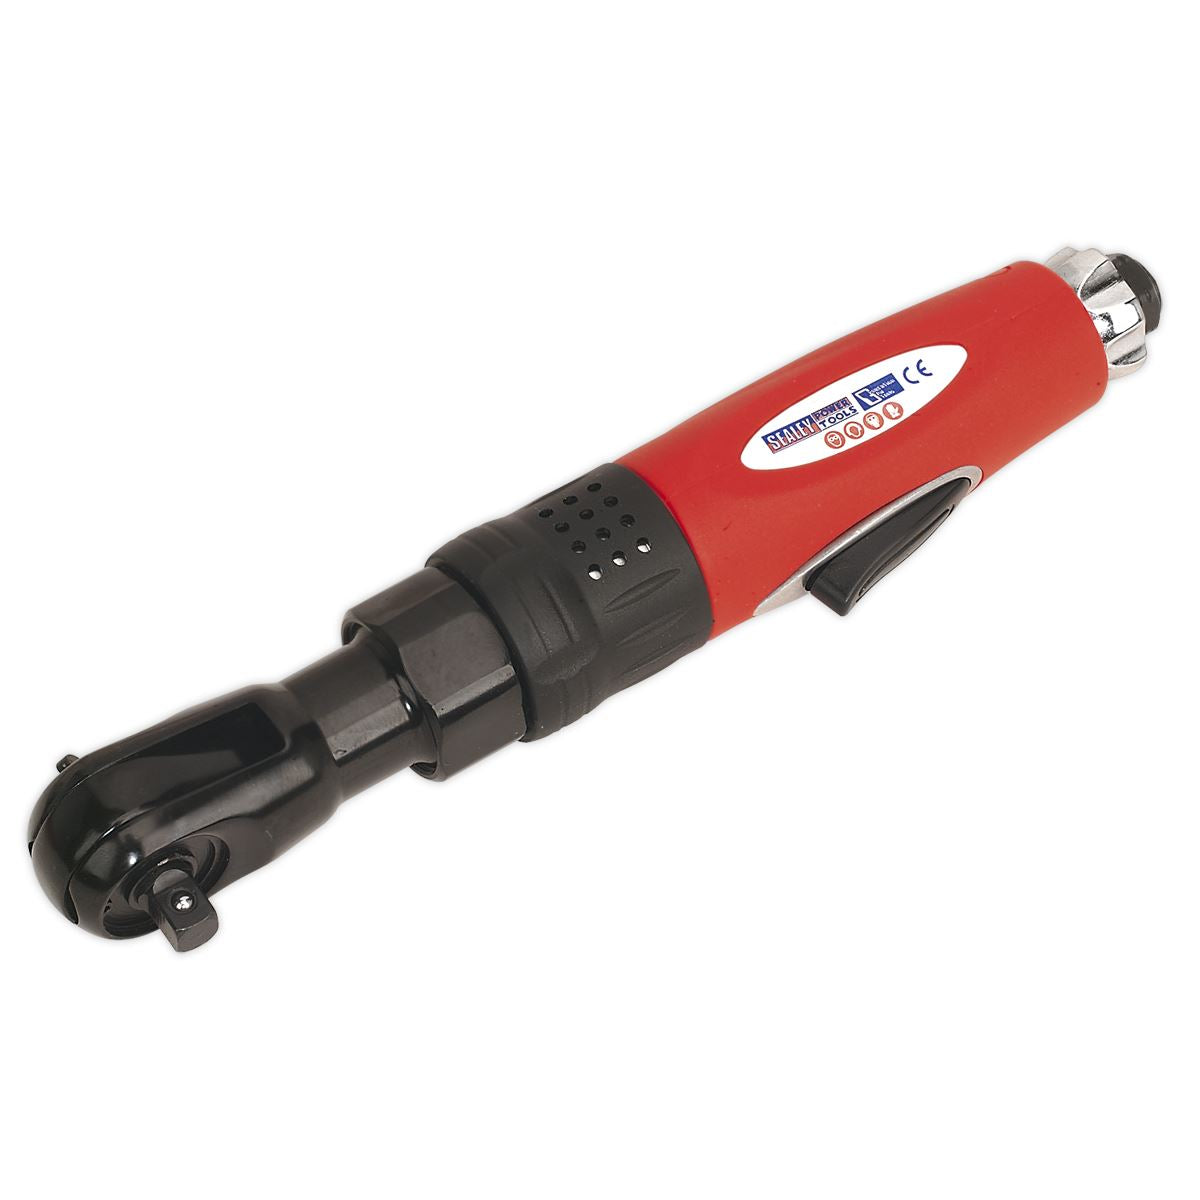 Generation Air Ratchet Wrench 3/8"Sq Drive